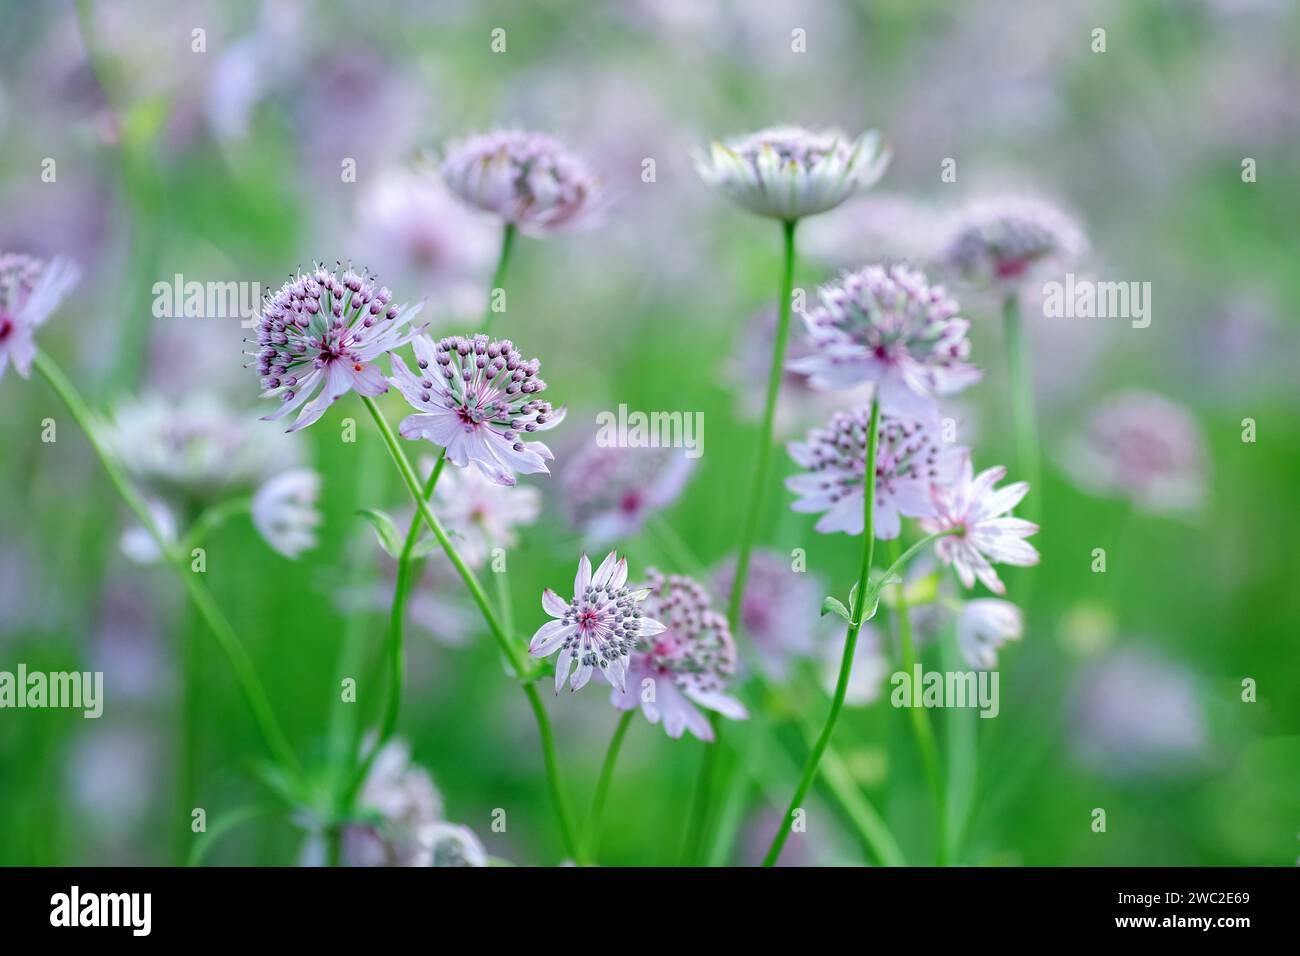 Astrantia major, the great masterwort, is a species of flowering plant in the family Apiaceae. Stock Photo